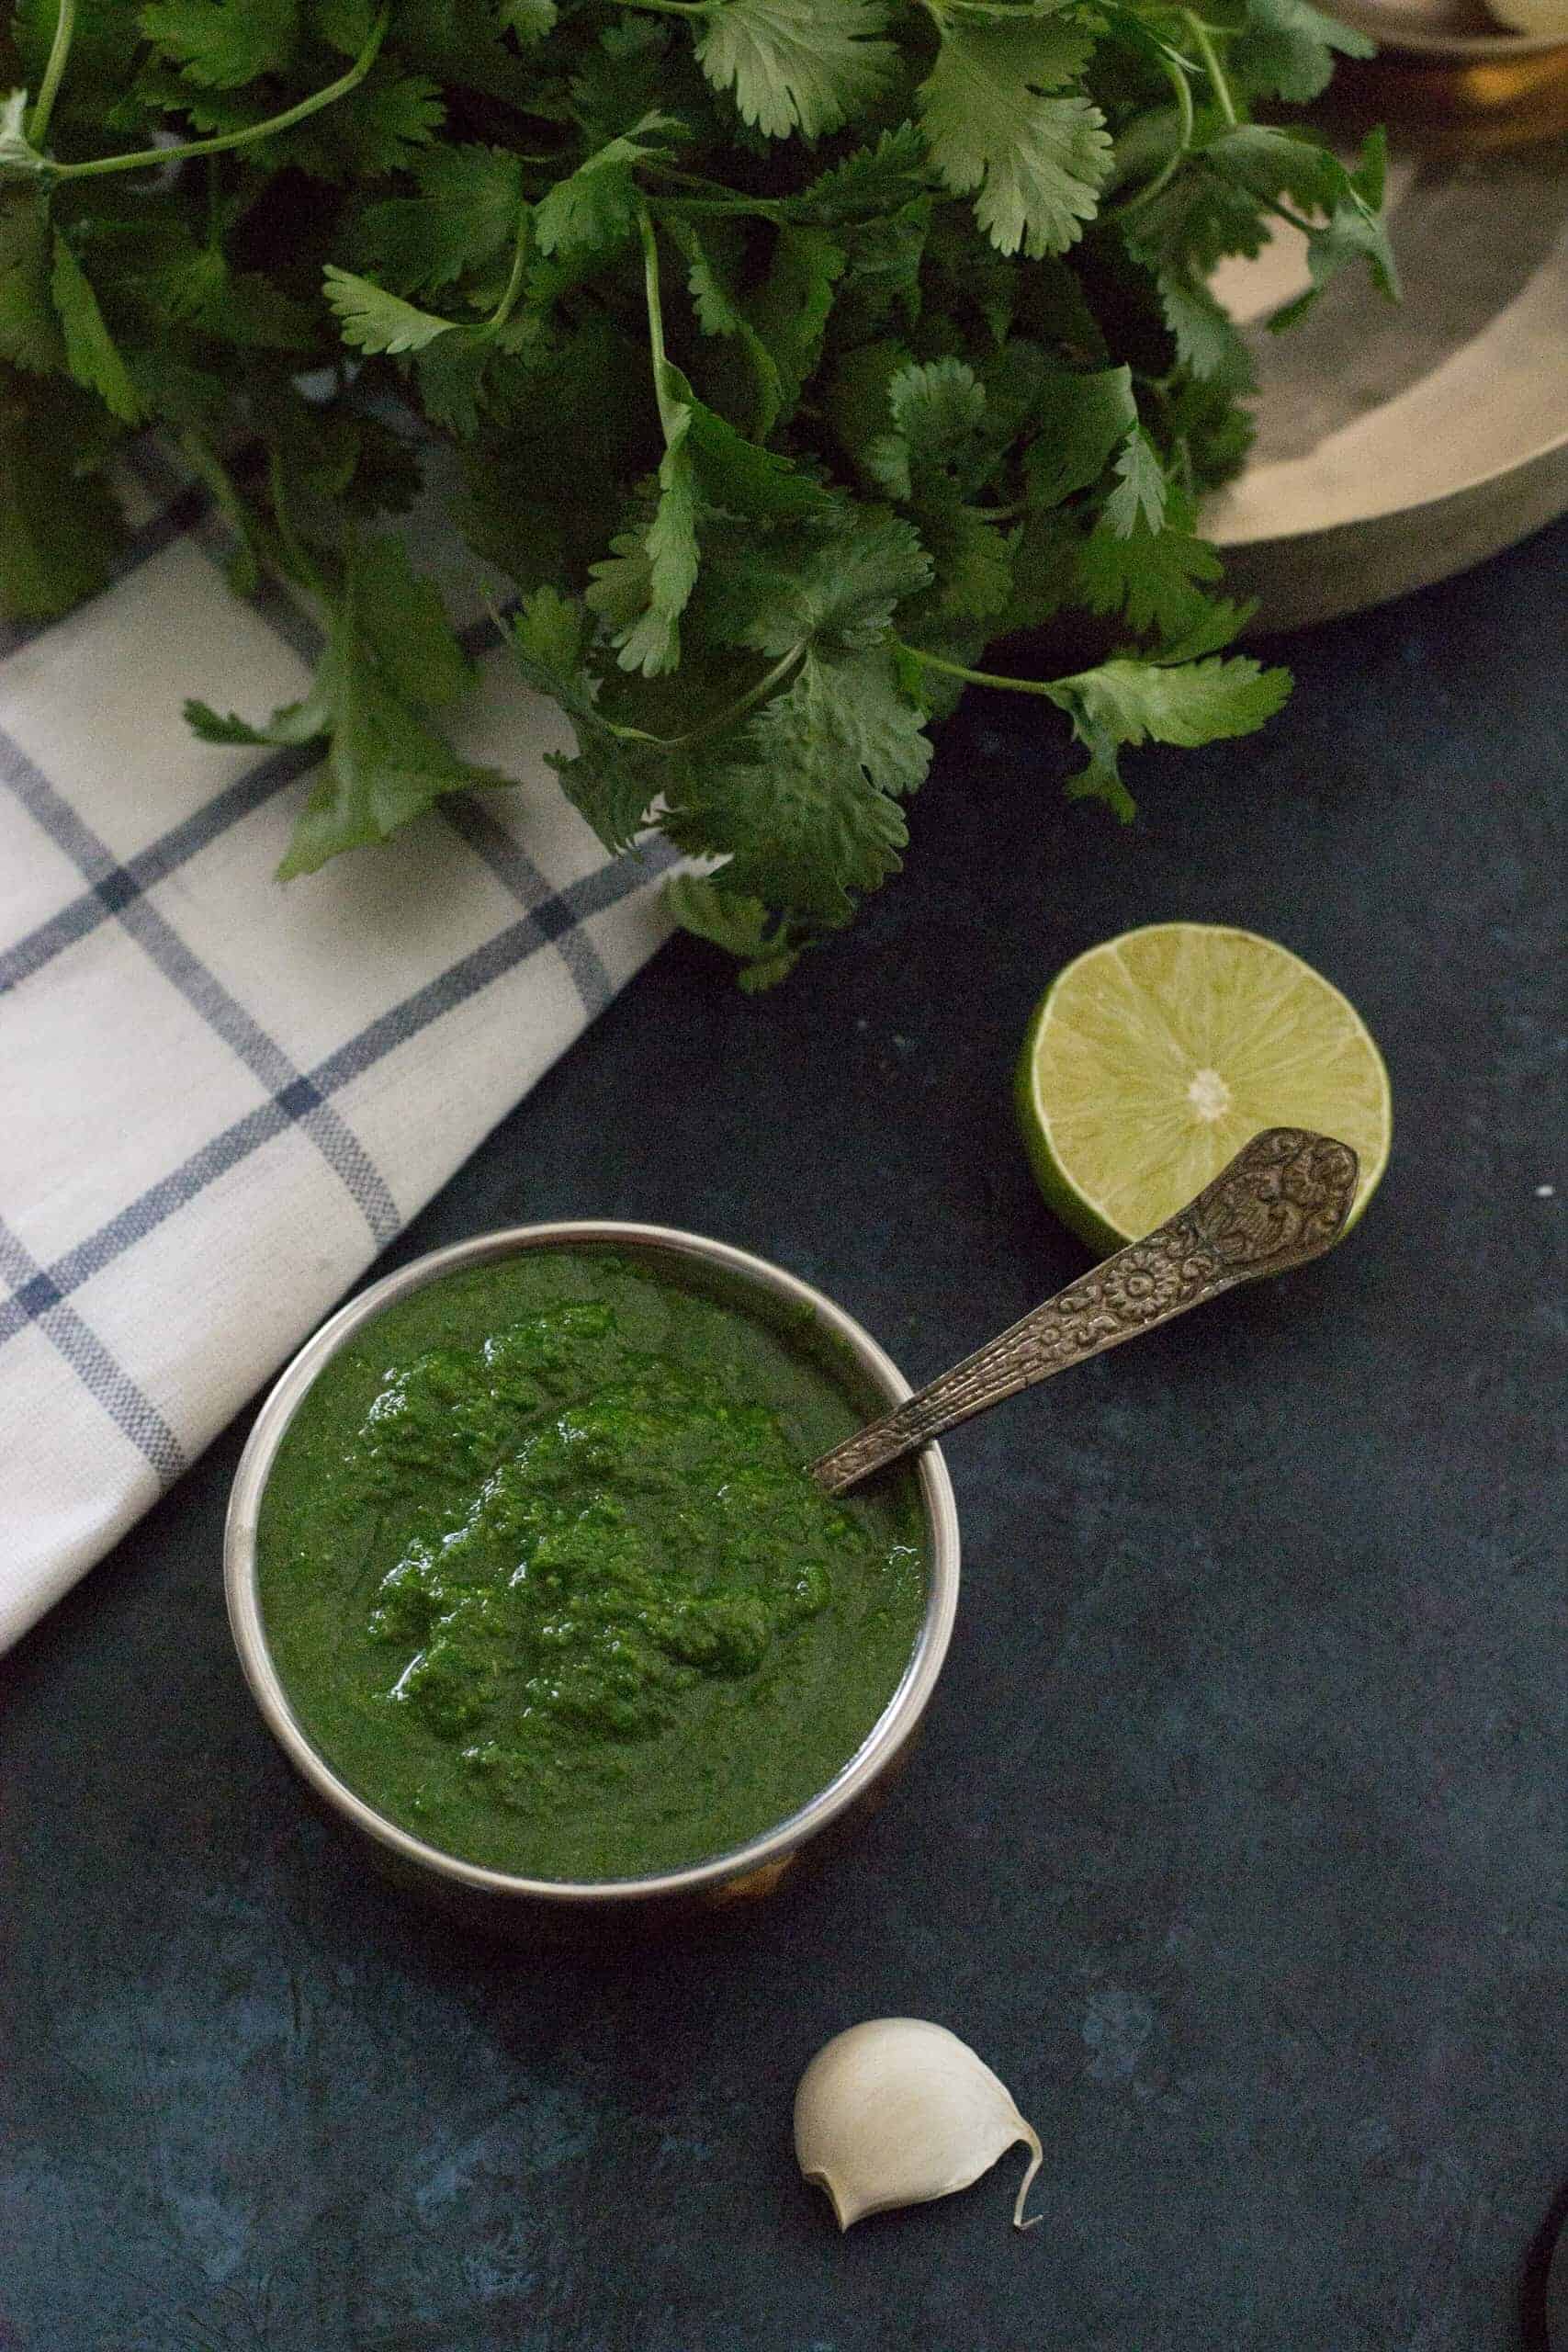 Coriander or cilantro chutney pictured with ingredients such as lime, coriander and garlic